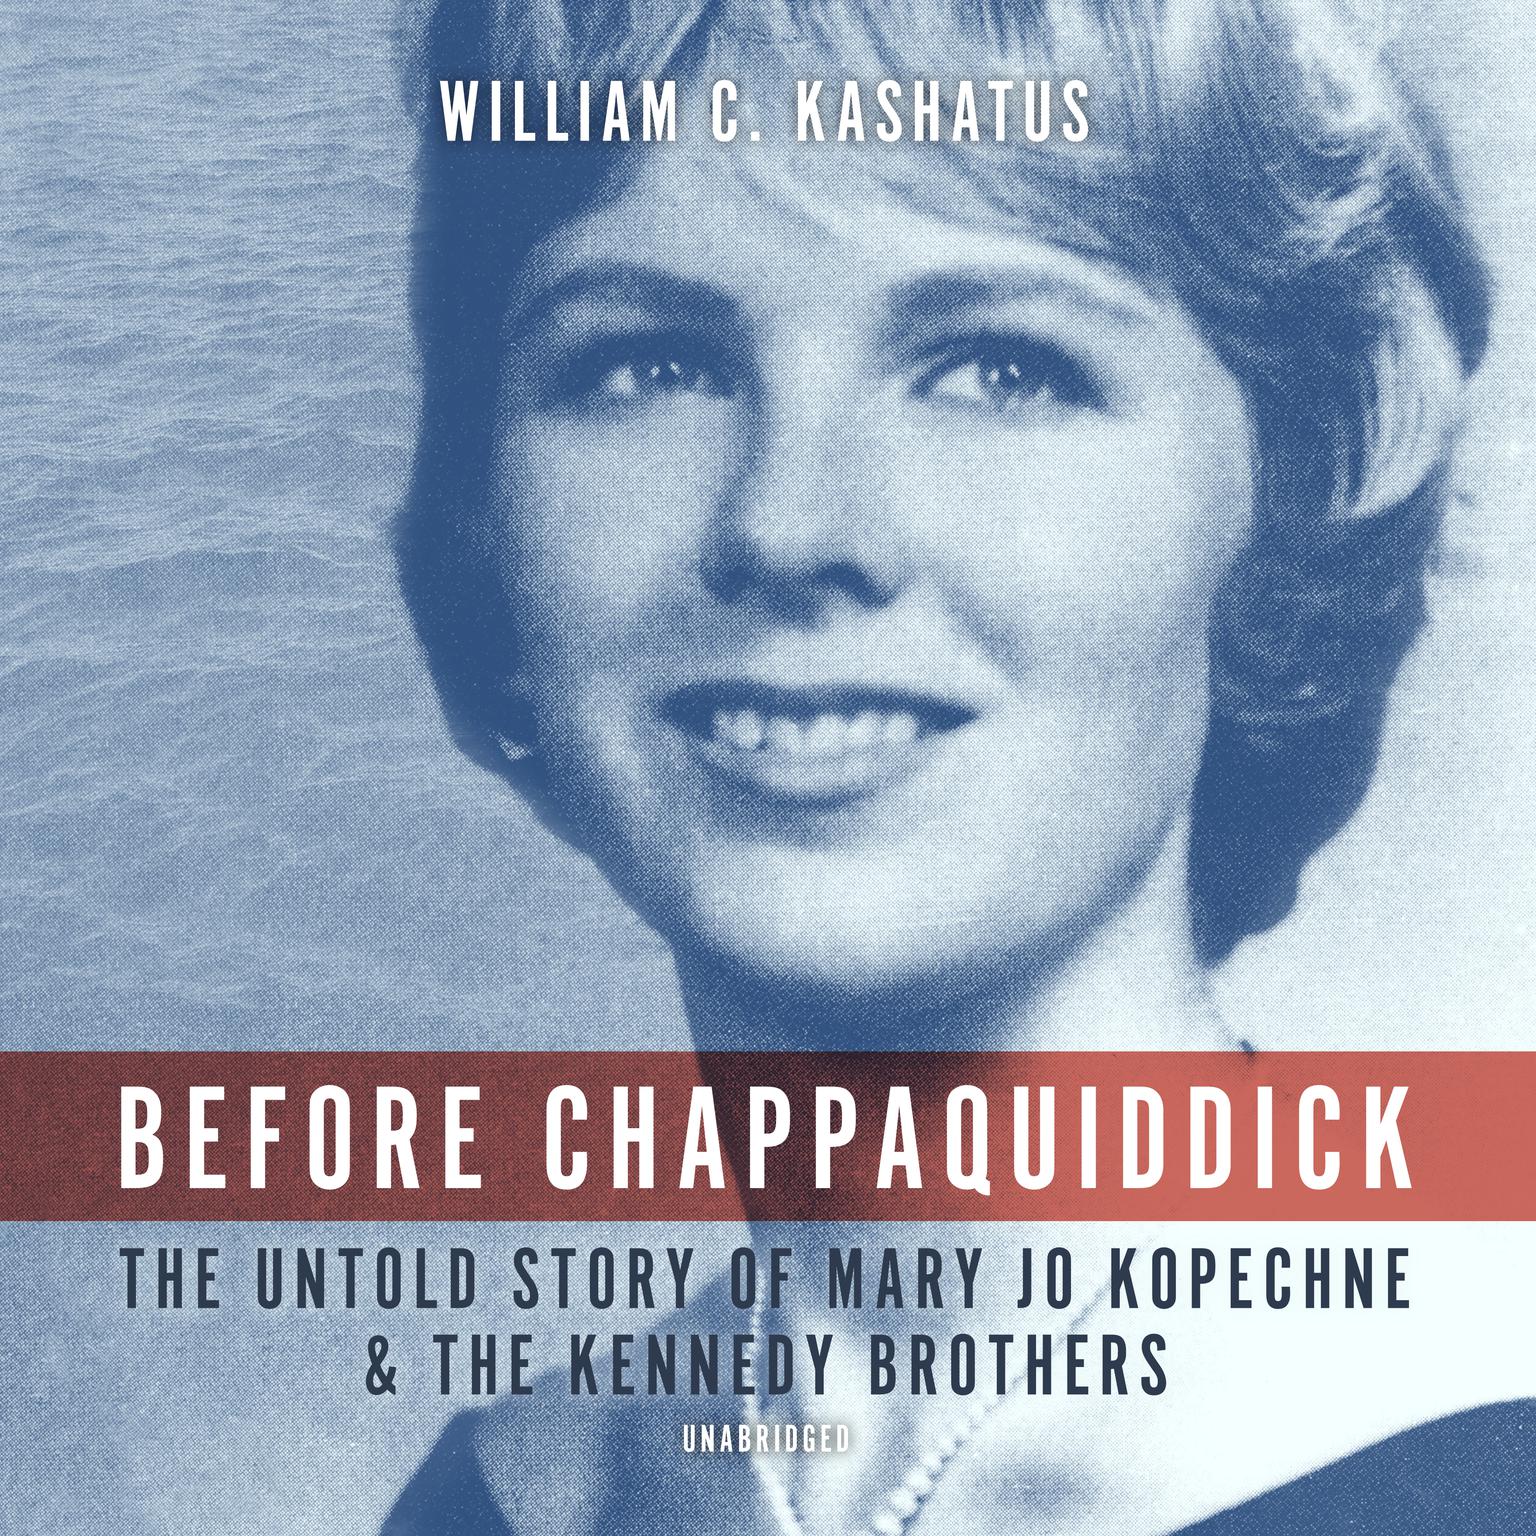 Before Chappaquiddick: The Untold Story of Mary Jo Kopechne and the Kennedy Brothers Audiobook, by William C. Kashatus